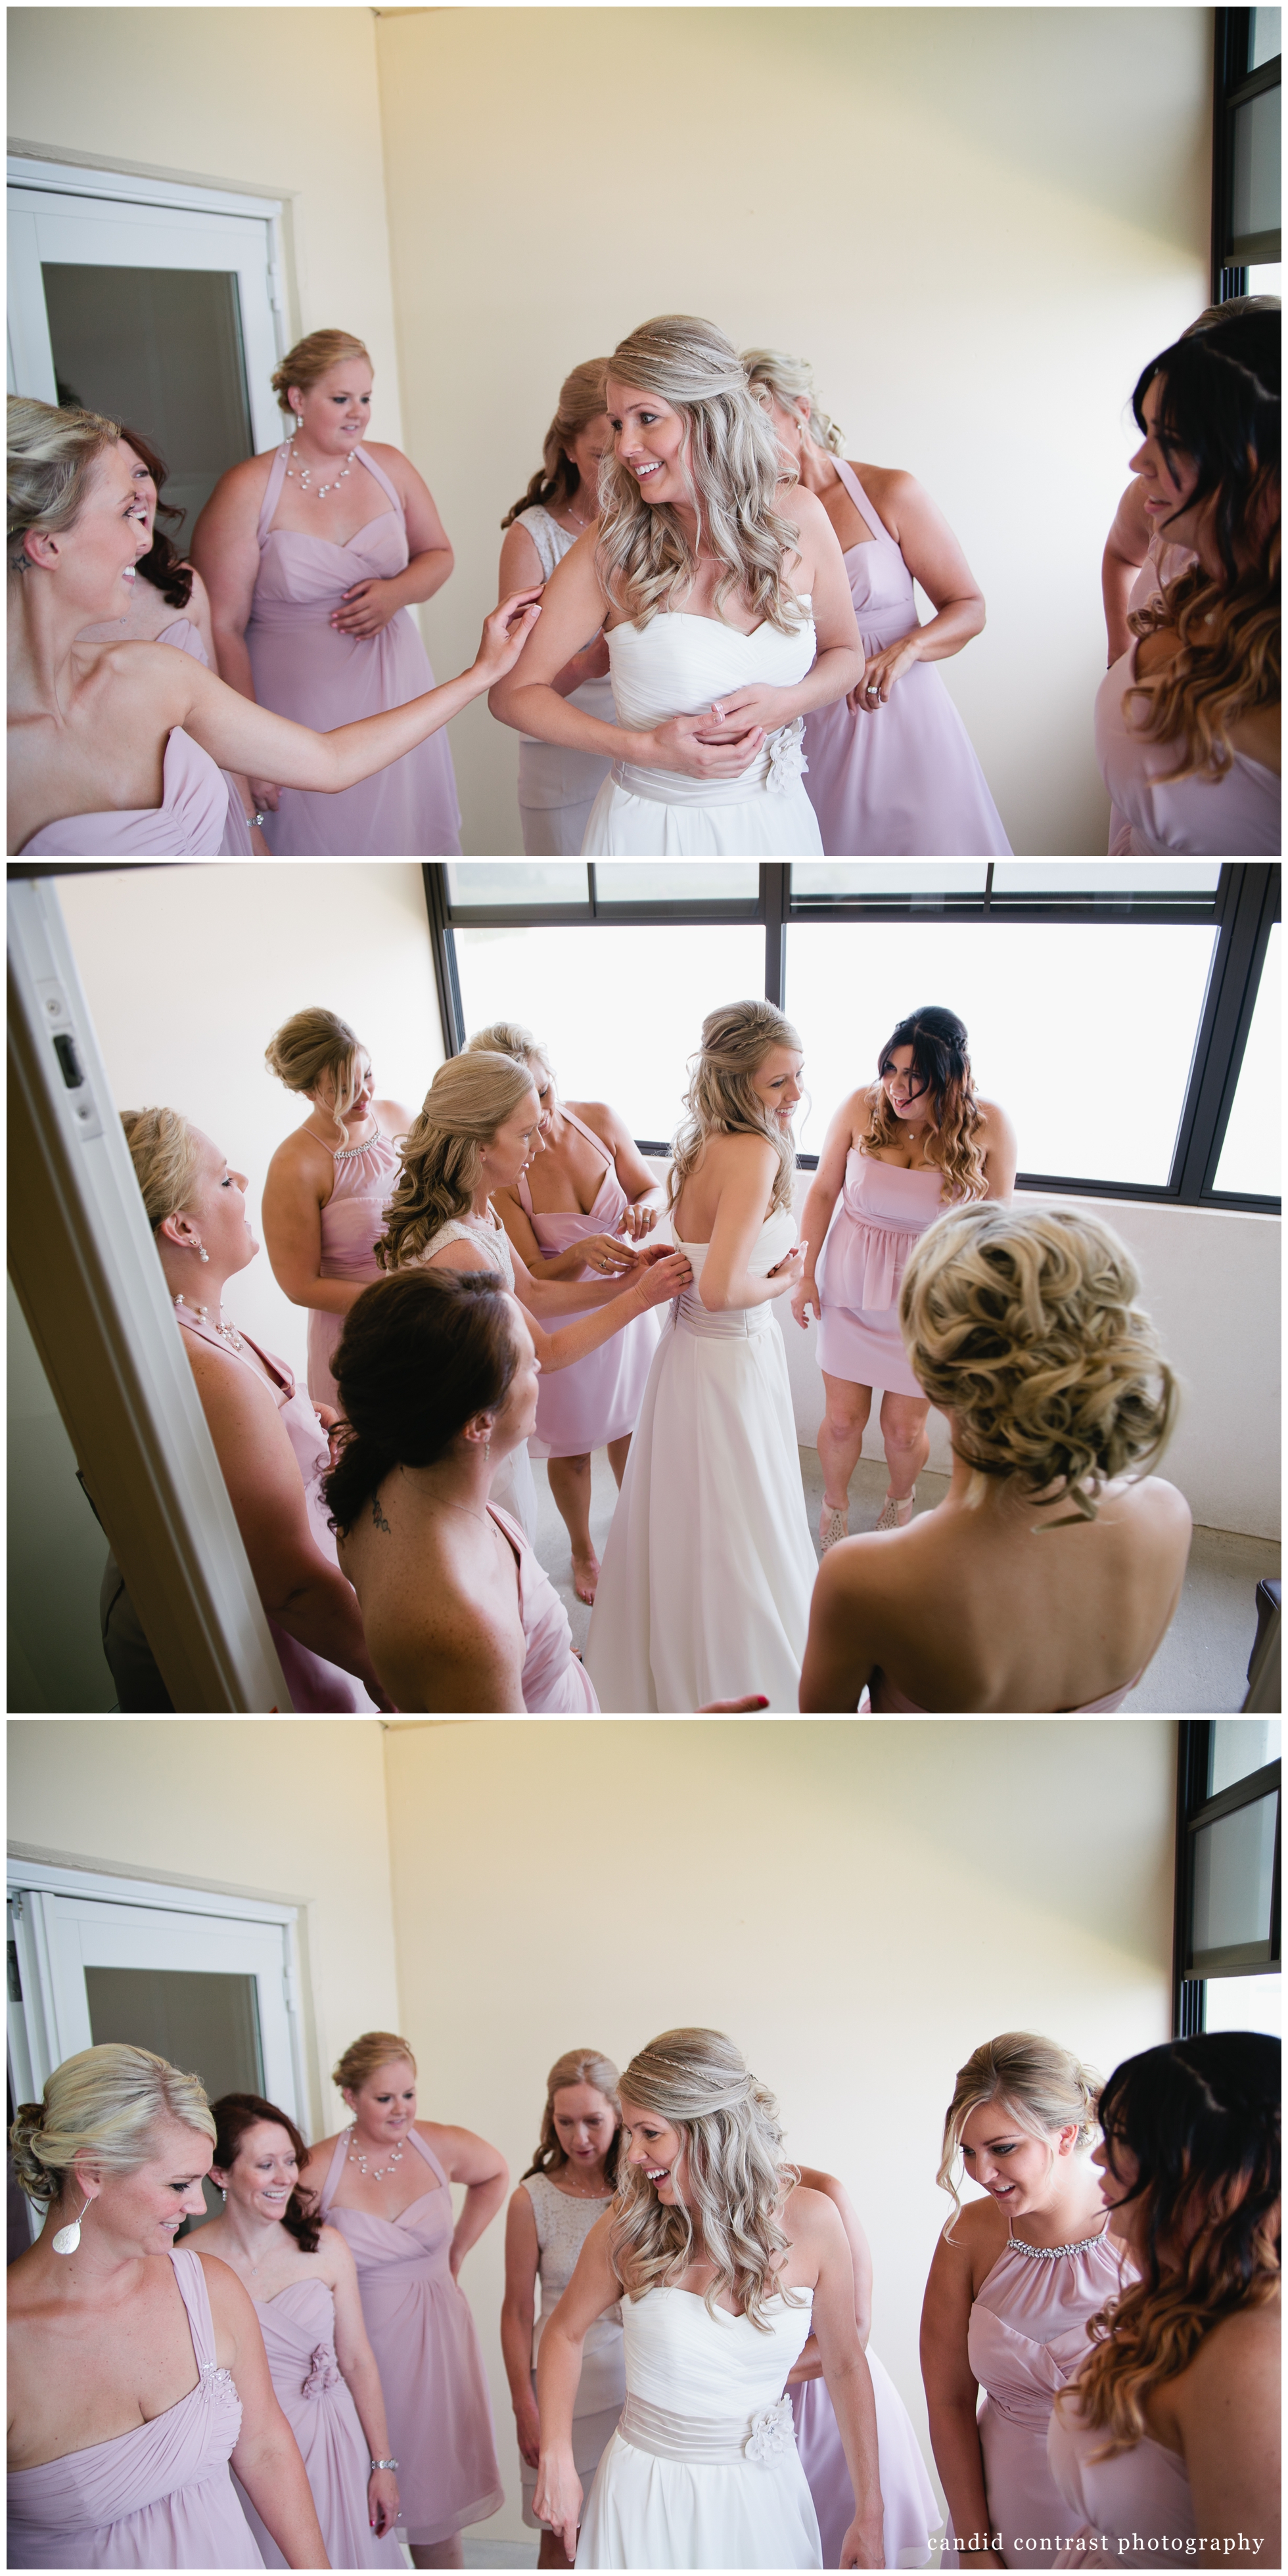 getting ready for Bellevue Iowa wedding at The Shore Event Centre, pink bridesmaids dresses, iowa wedding photographer candid contrast photography